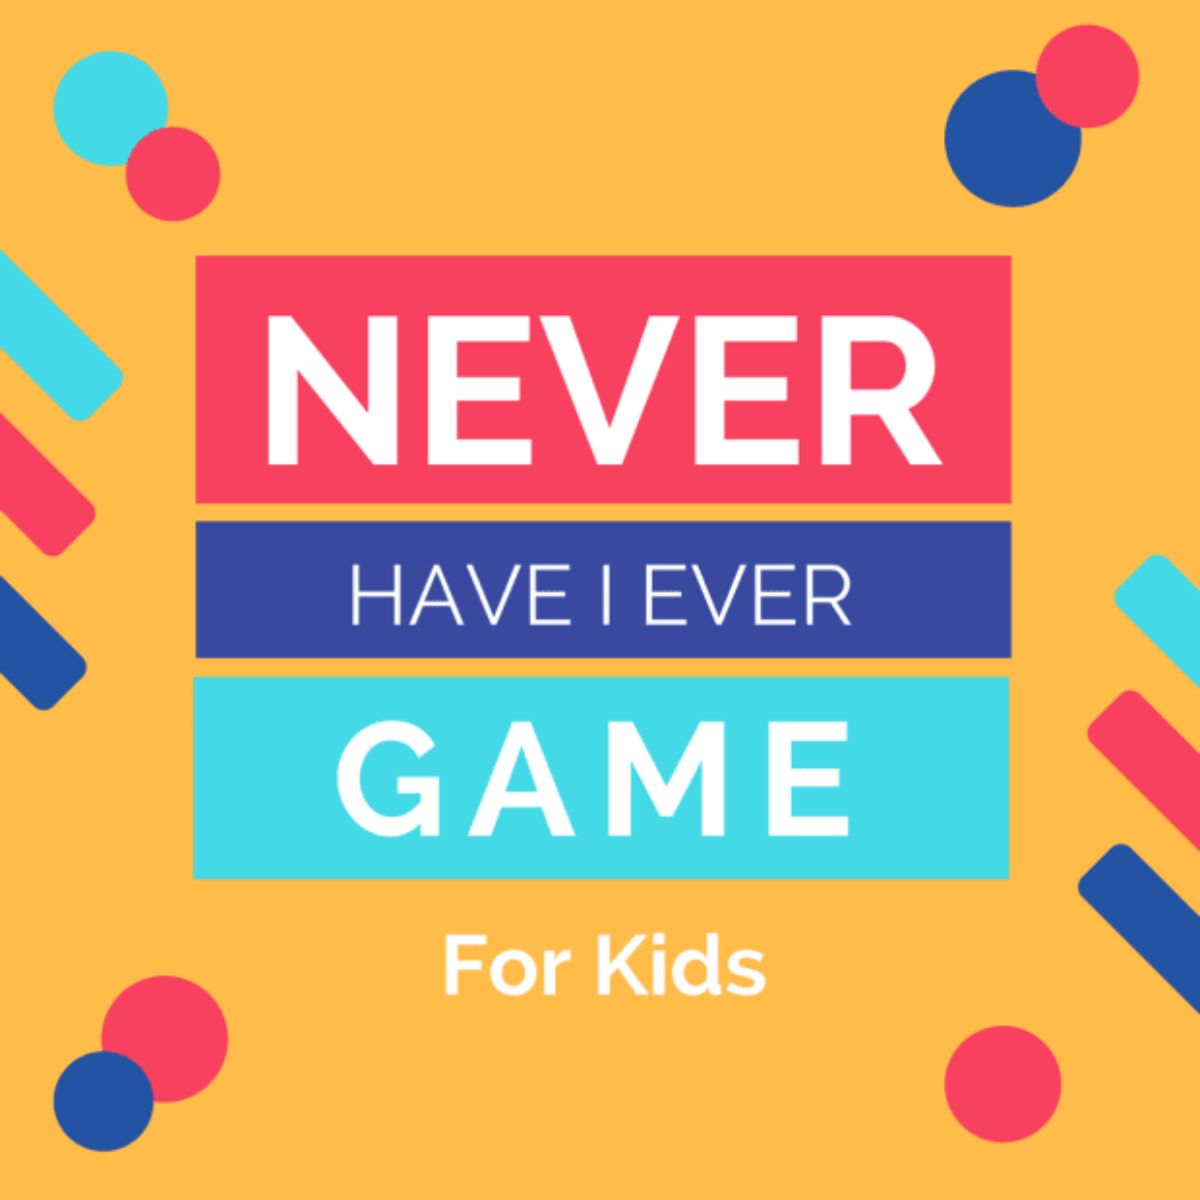 the text reads"Never have I ever game for kids" There is a yellow background with blue and red patterns